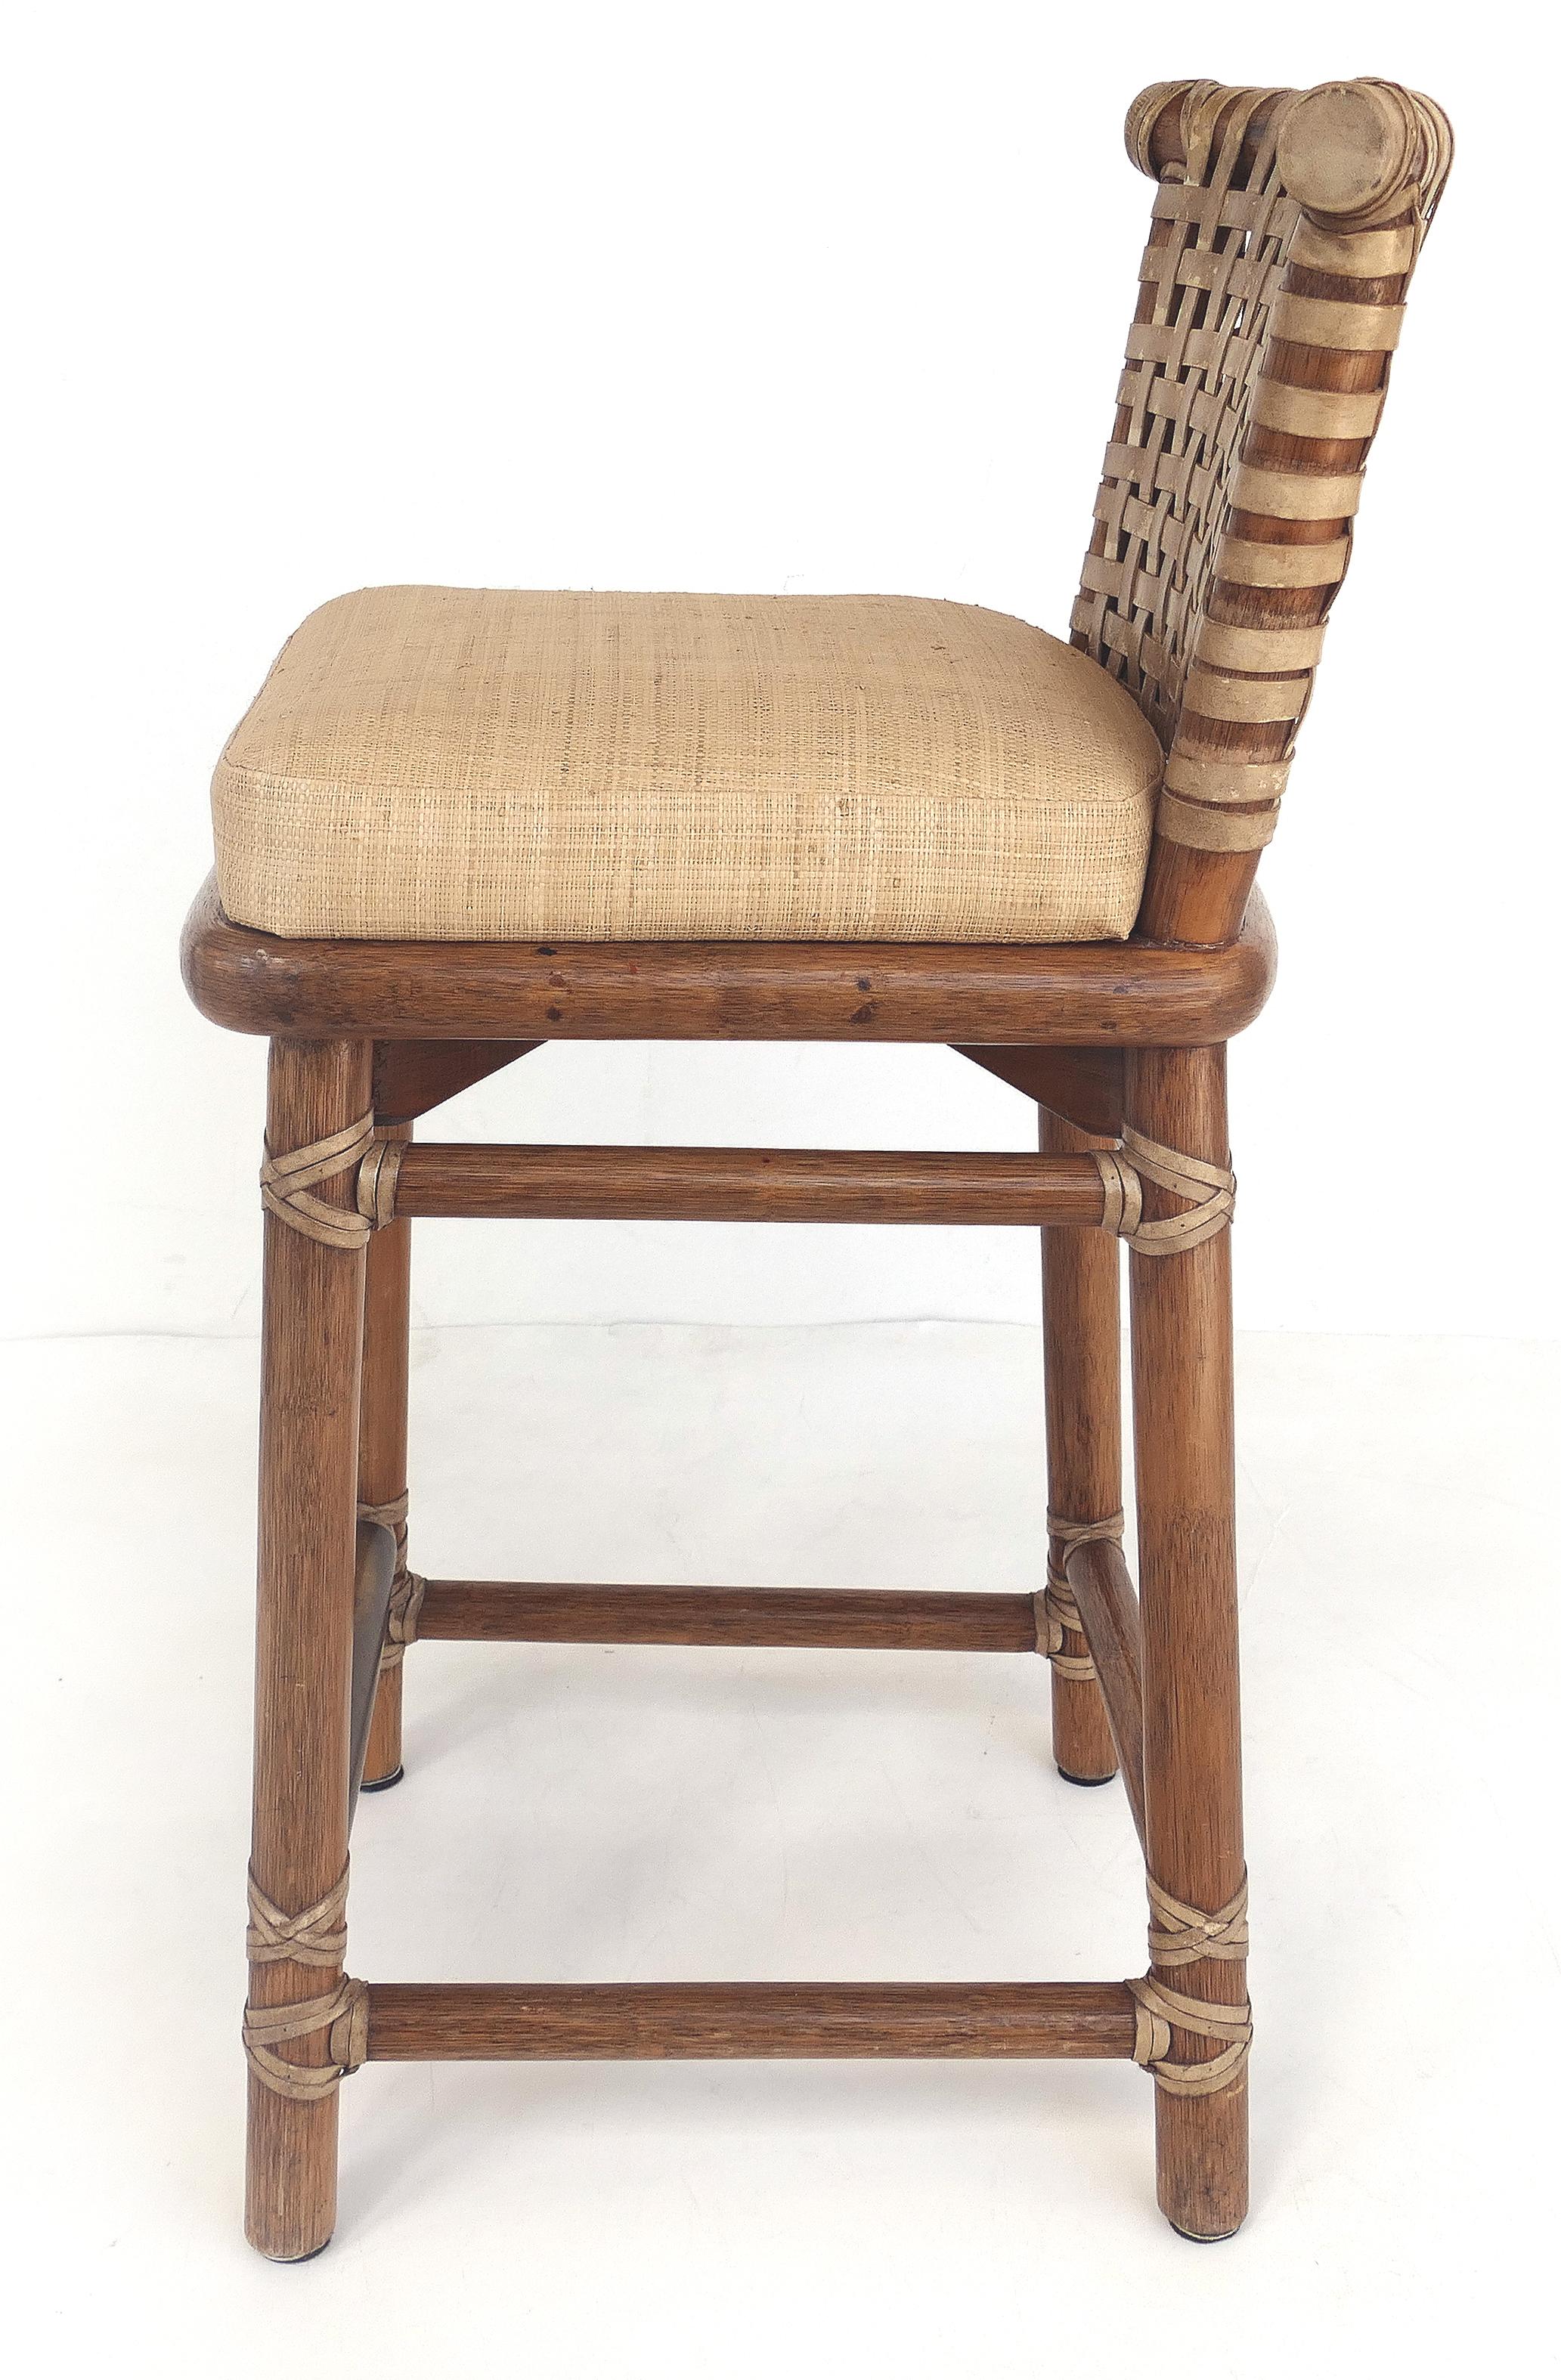 McGuire San Francisco Leather Bound Counter Stools with Raffia Upholstered Seats (amerikanisch)